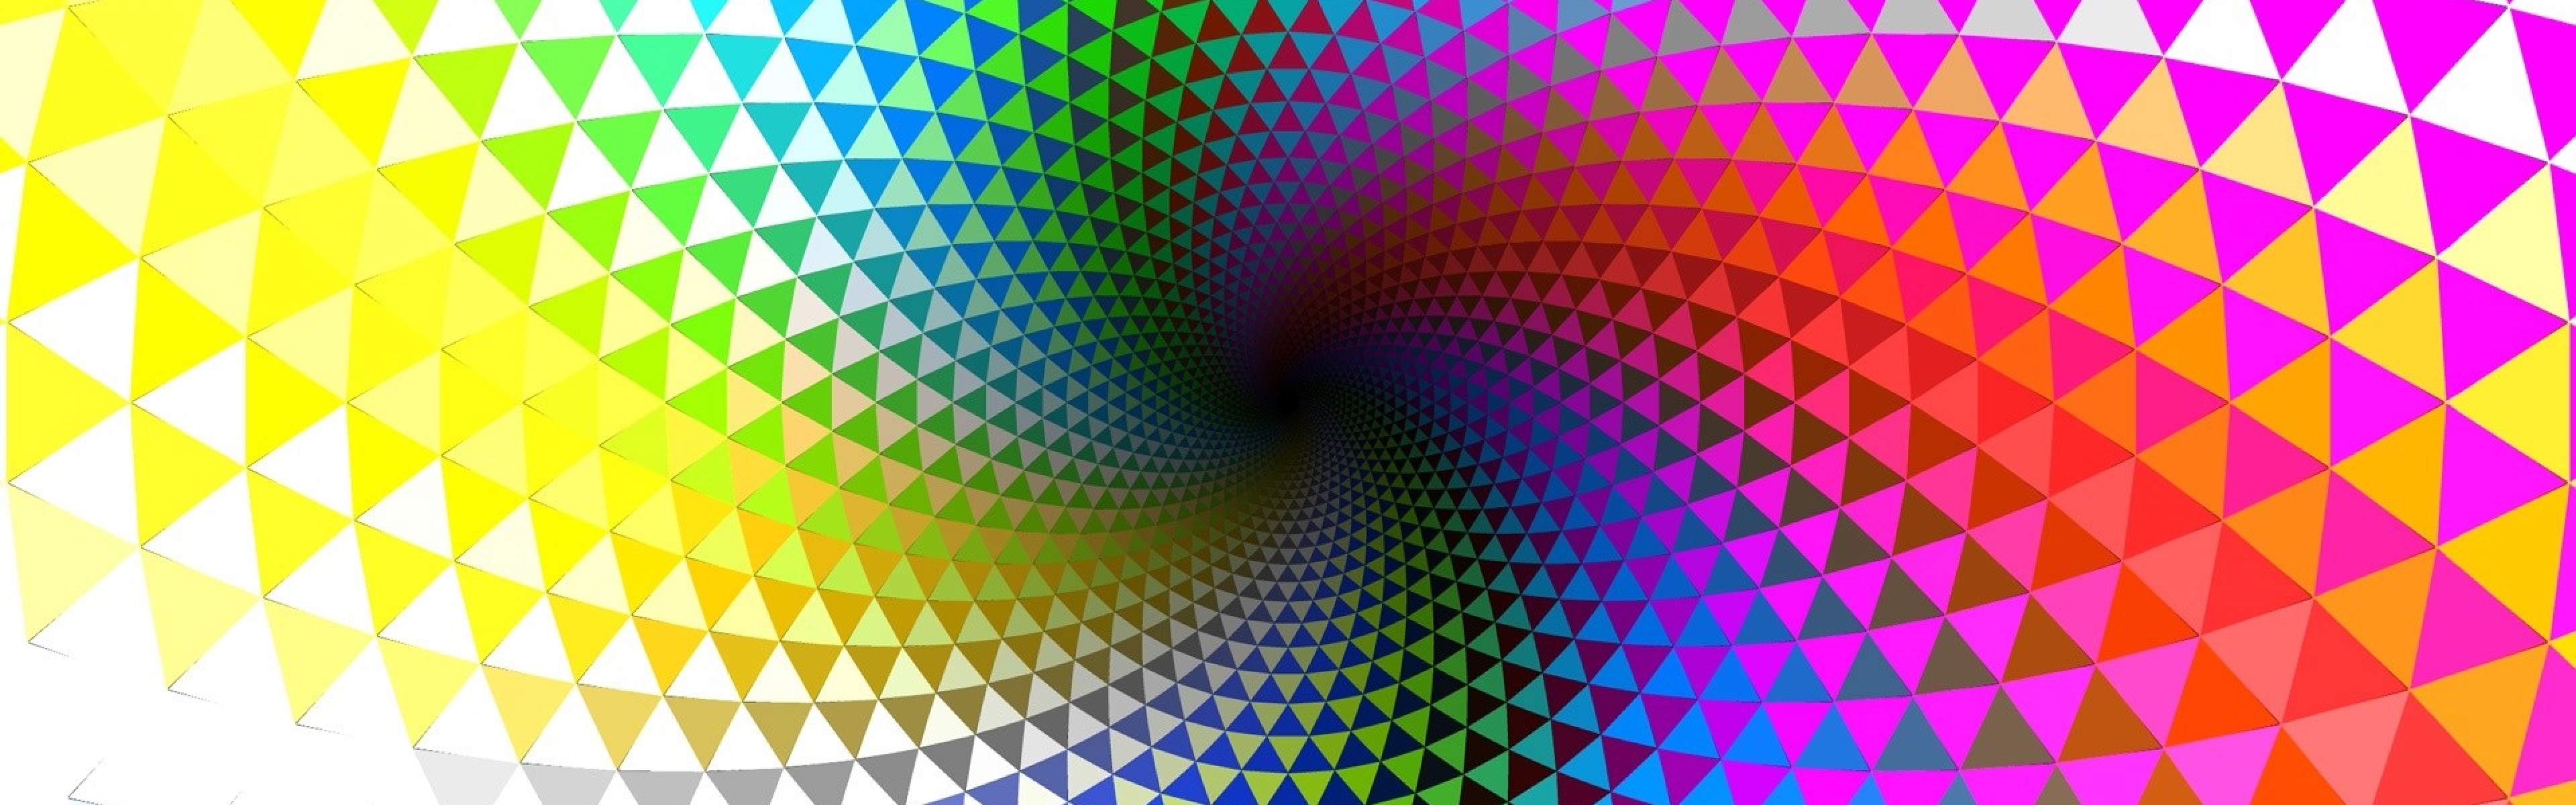 Download Wallpaper 3840x1200 Rotation, Multi colored, Lines, shape